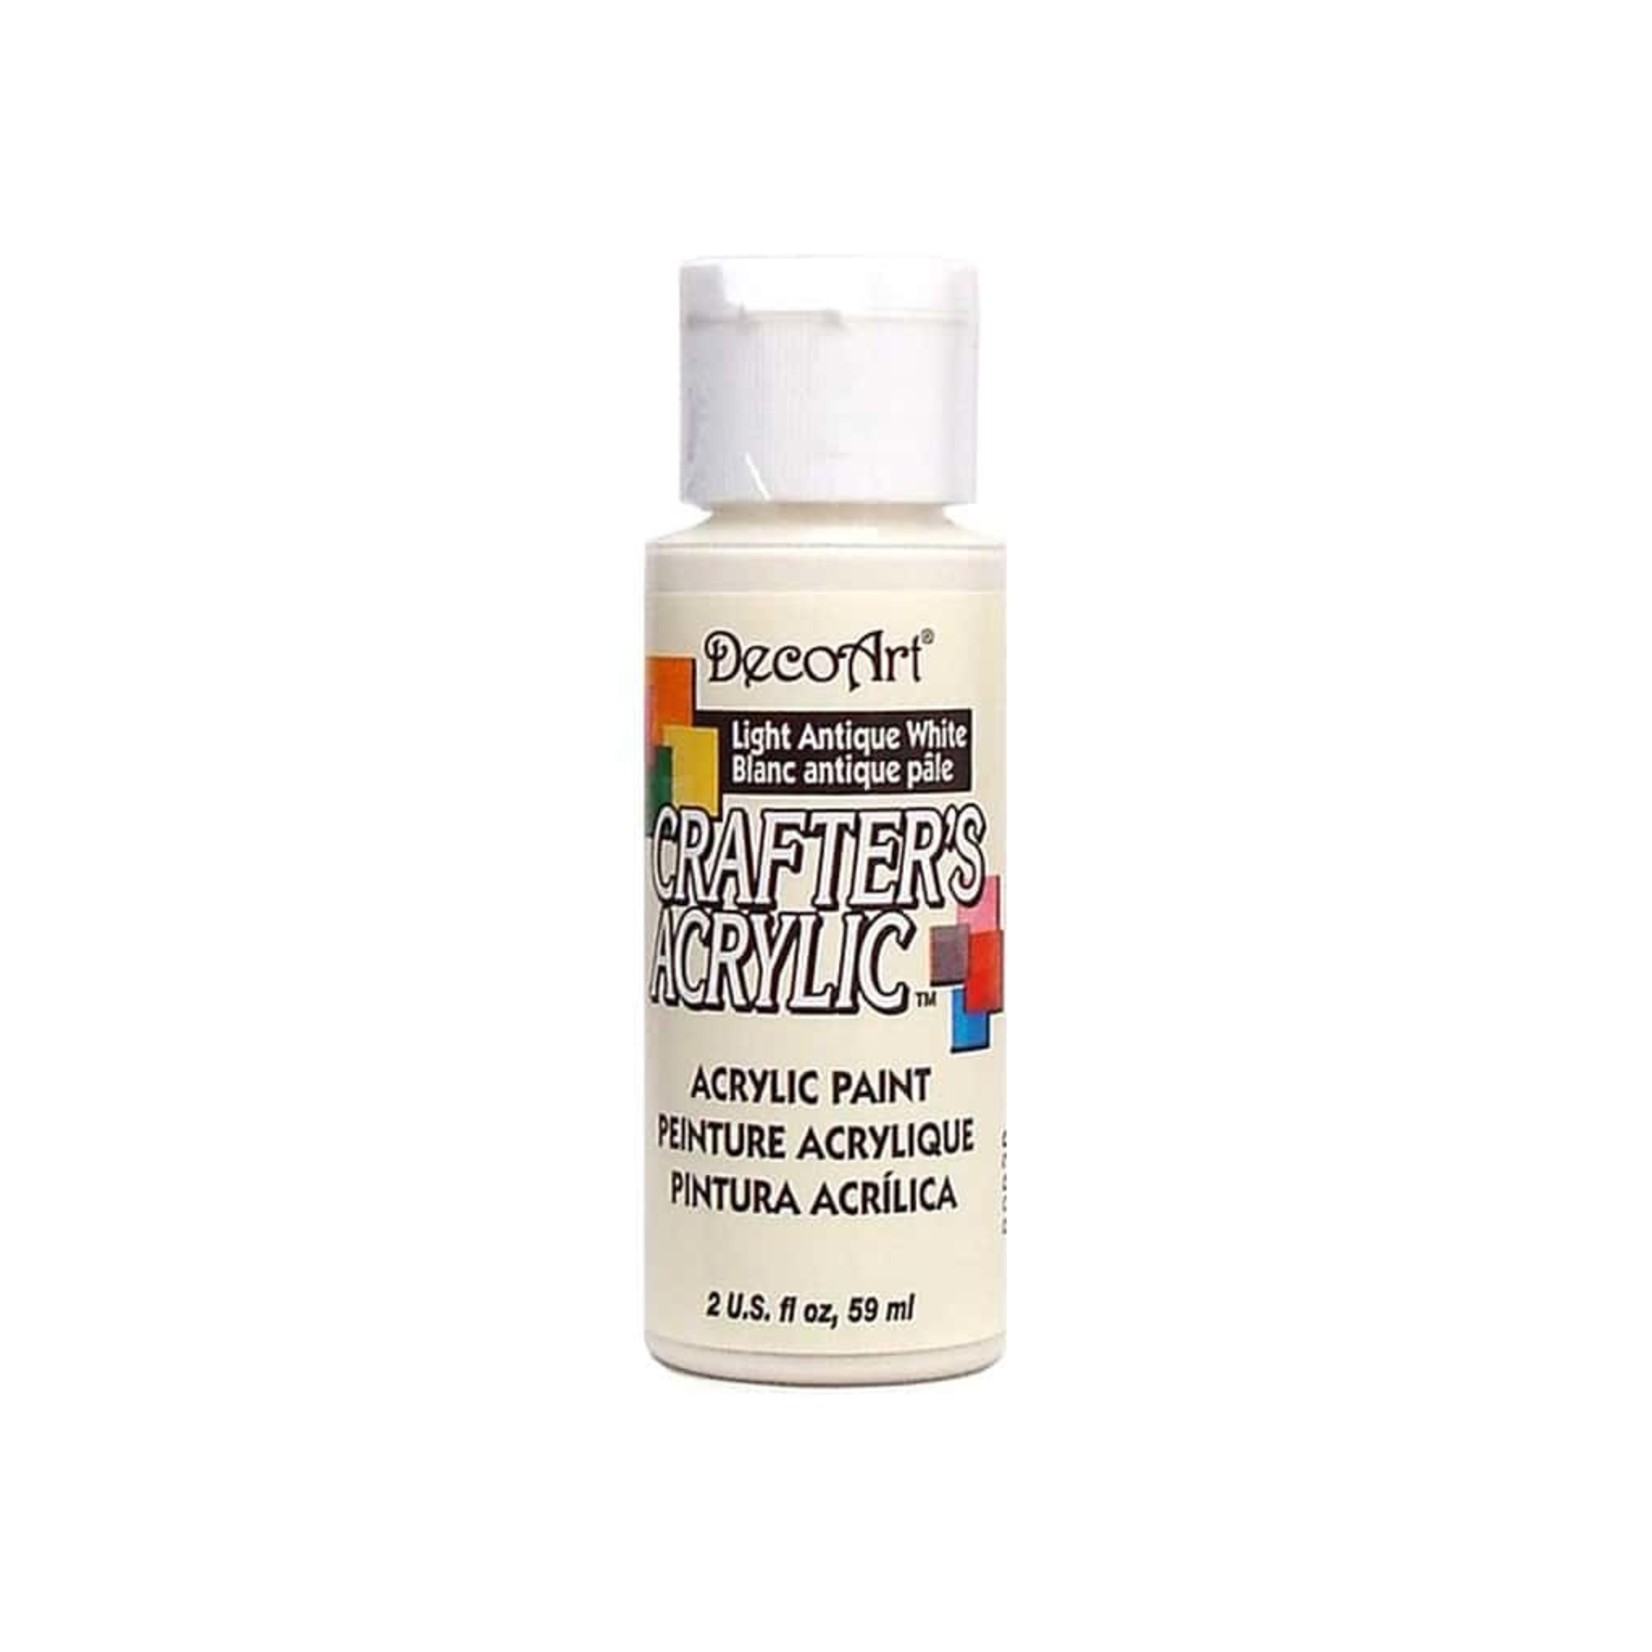 CRAFTERS ACRYLIC PAINT - LIGHT ANTIQUE WHITE